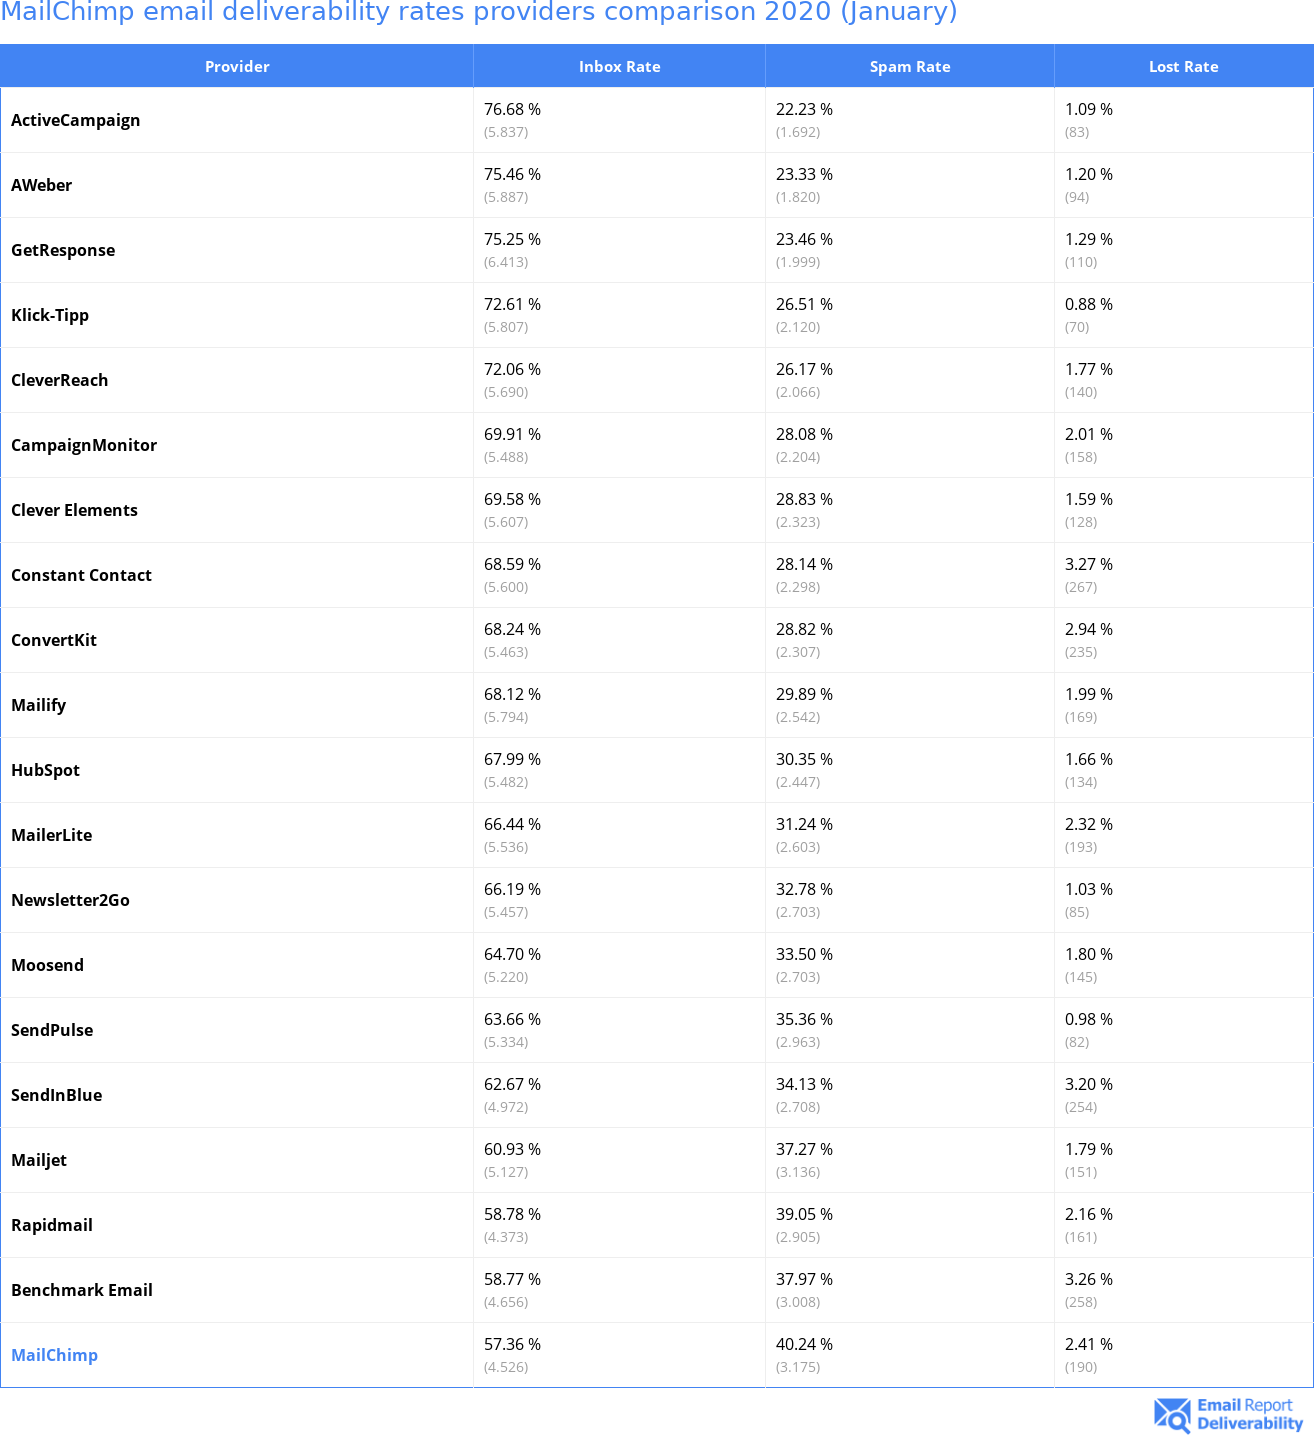 MailChimp email deliverability rates providers comparison 2020 (January)